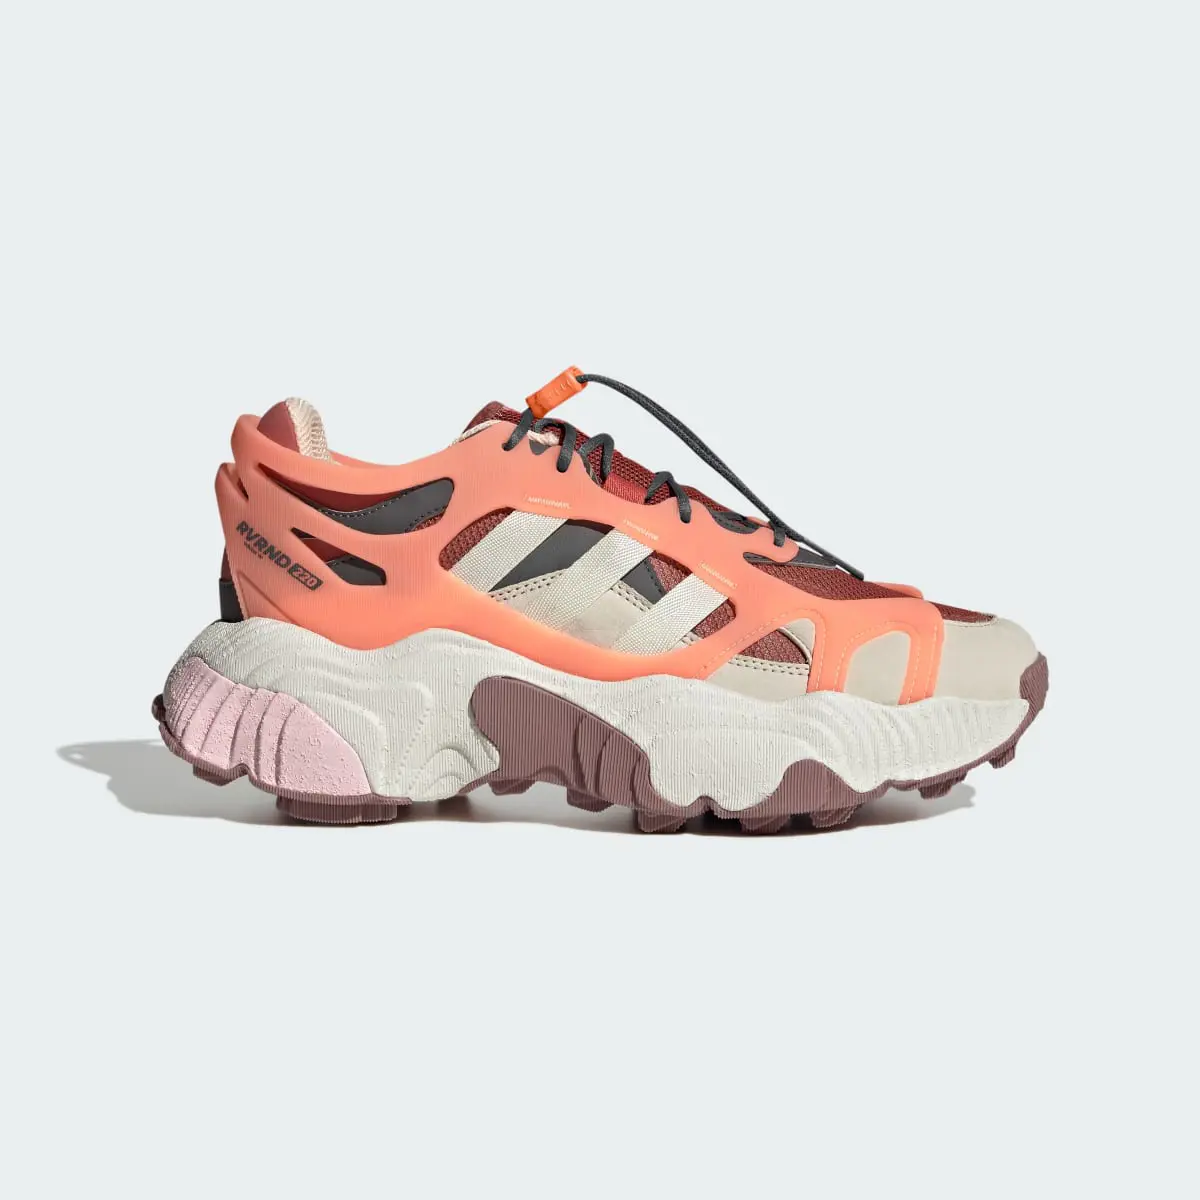 Adidas Roverend Adventure Shoes. 2